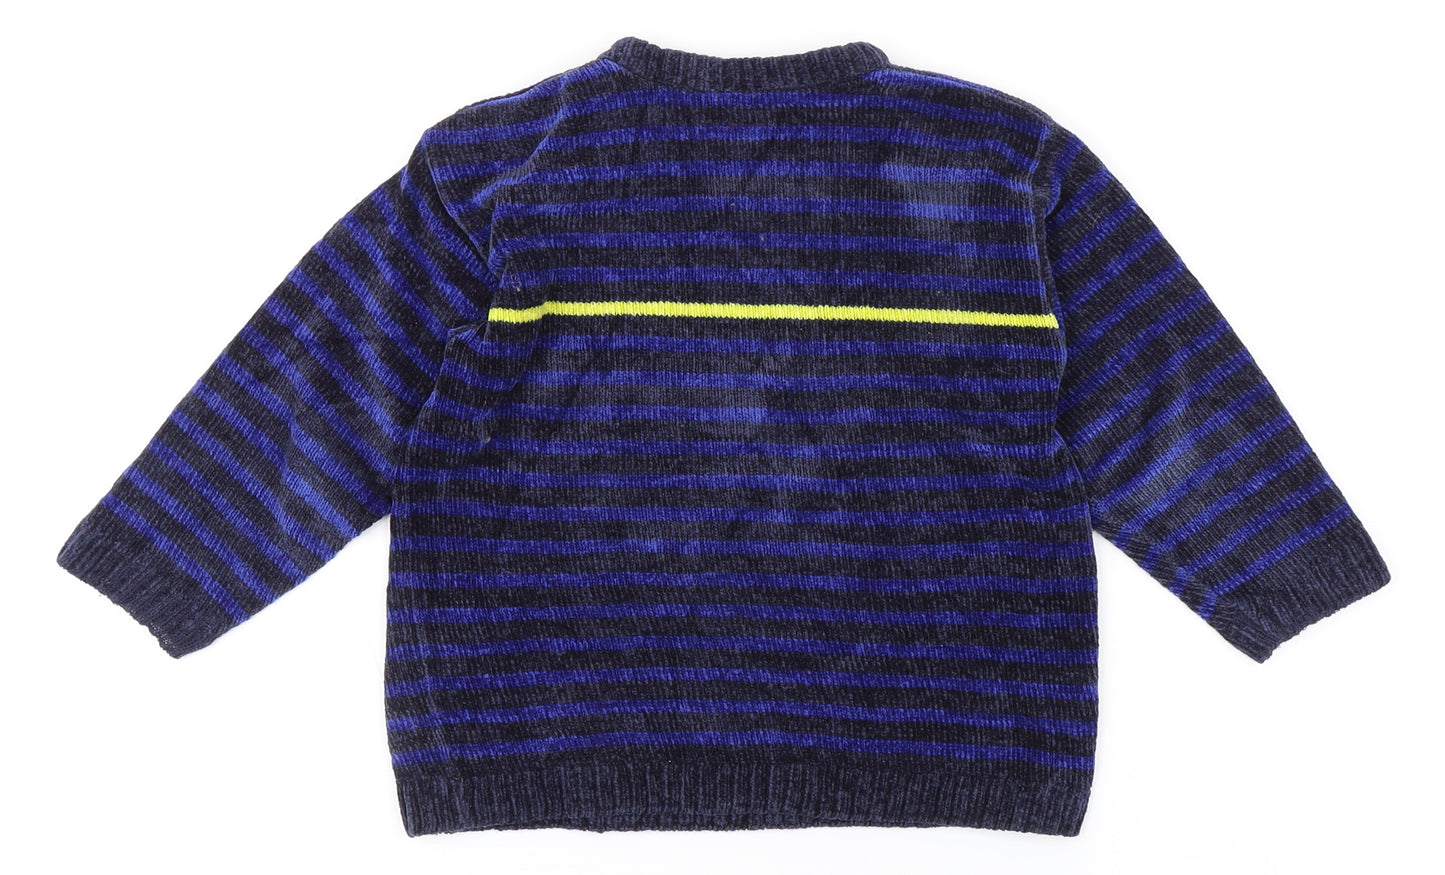 Tesco Boys Blue Round Neck Striped Acrylic Pullover Jumper Size 3-4 Years   - Chenille